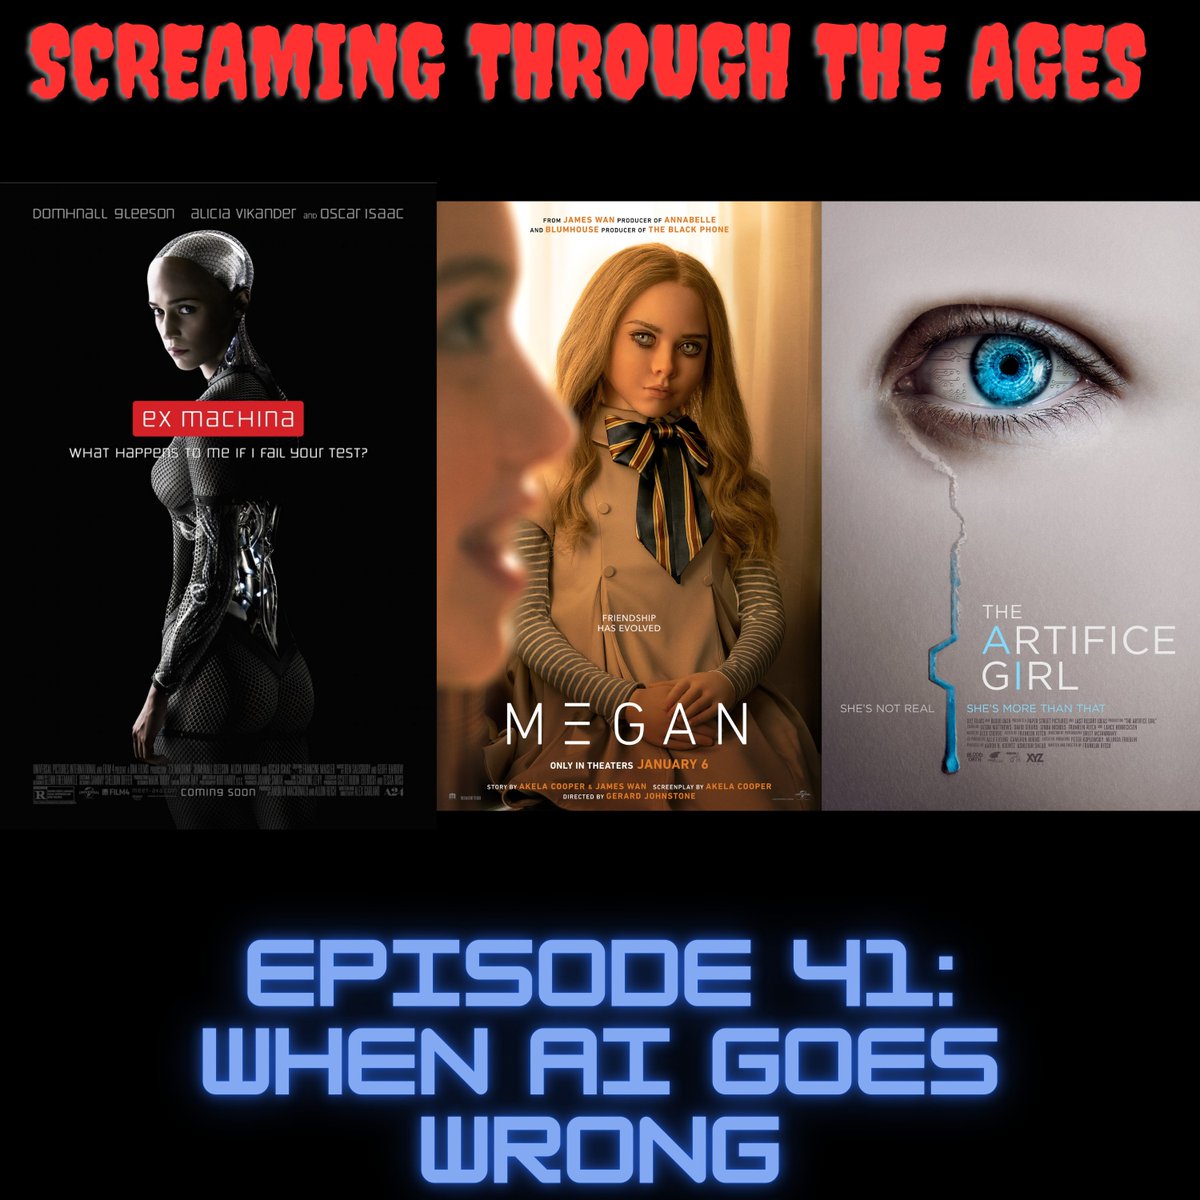 Episode 41 of Screaming Through the Ages is available now! In this episode I discuss what could happen if AI Goes Wrong and review a handful of AI related films including Ex Machina, M3gan and The Artifice Girl. feeds.captivate.fm/screaming-thro… #HorrorMovies #AI #sciencefiction